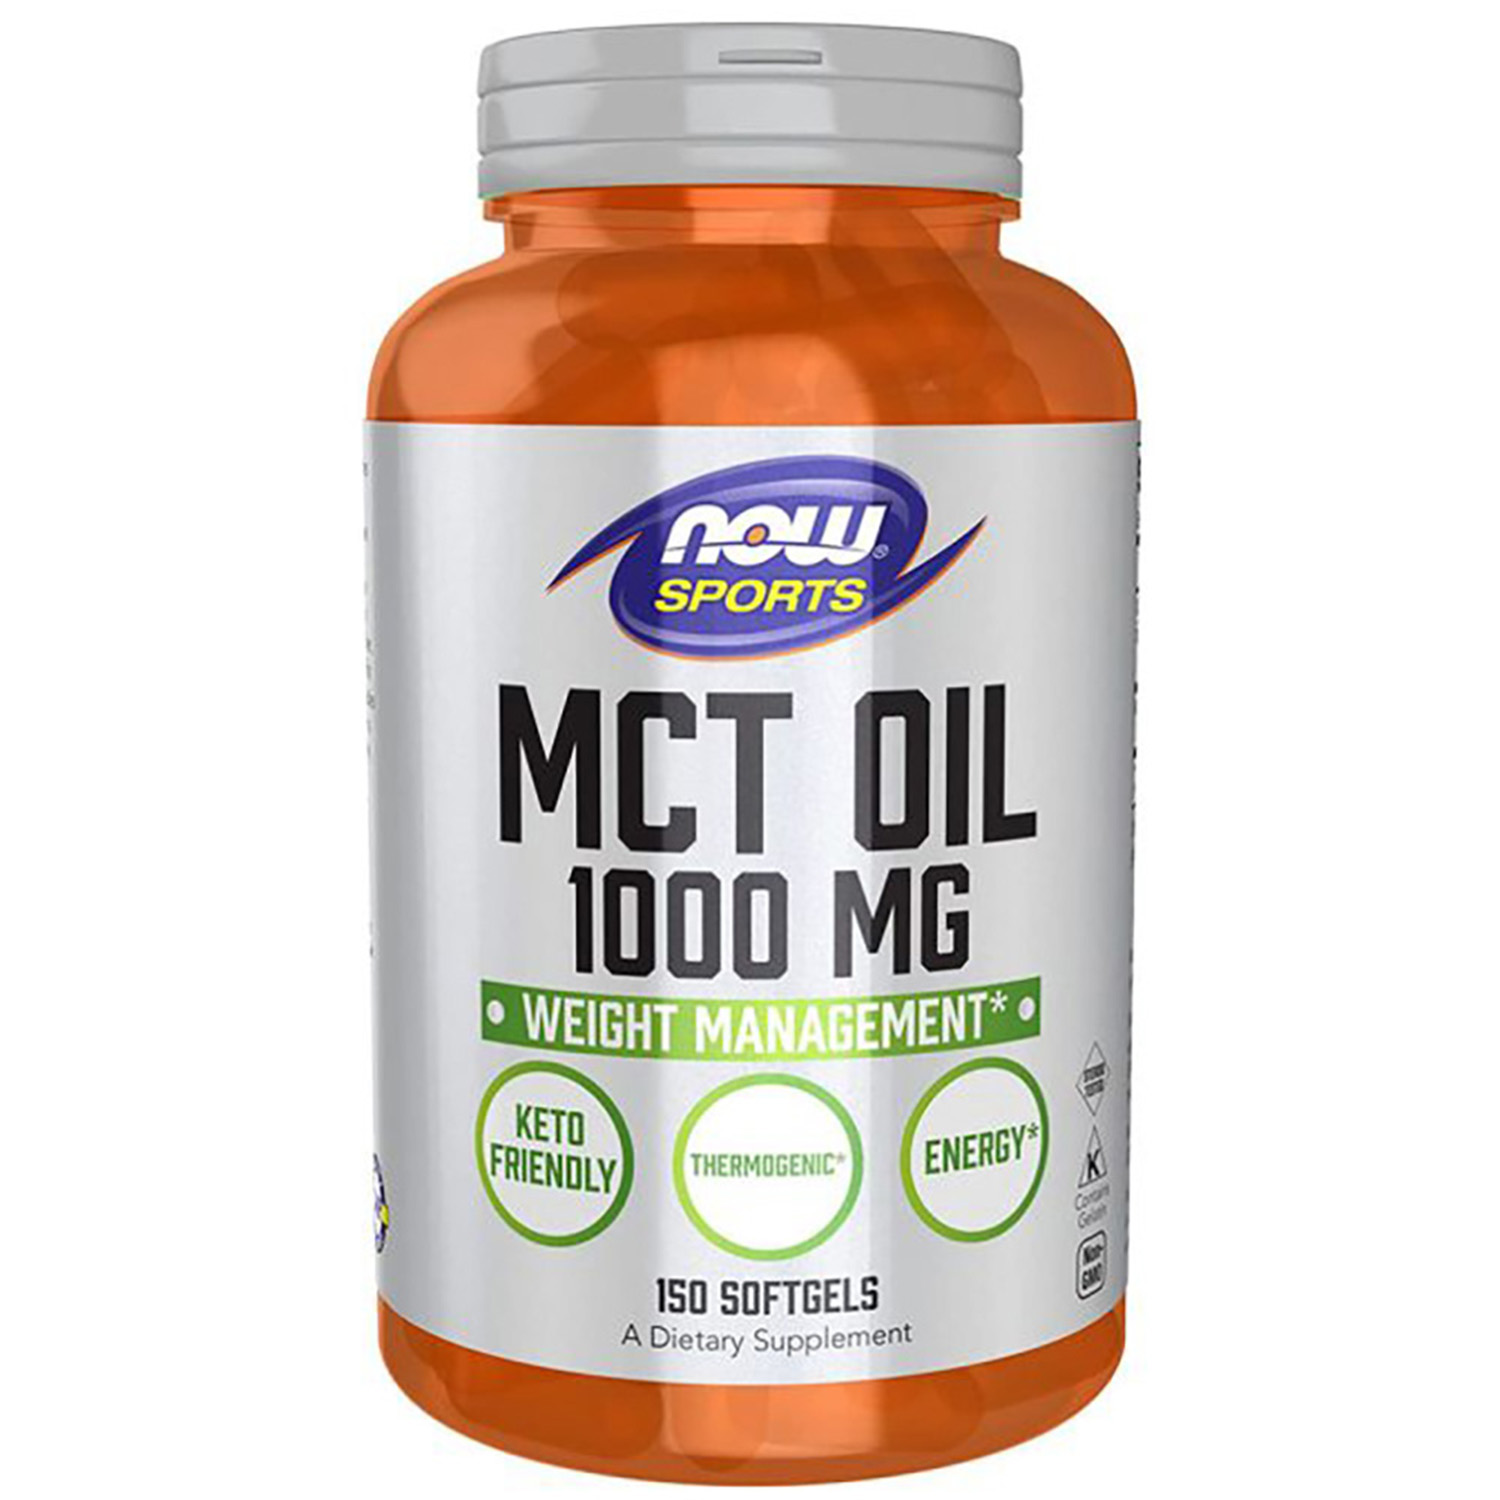 Now Sports Mct Oil 1000 Mg